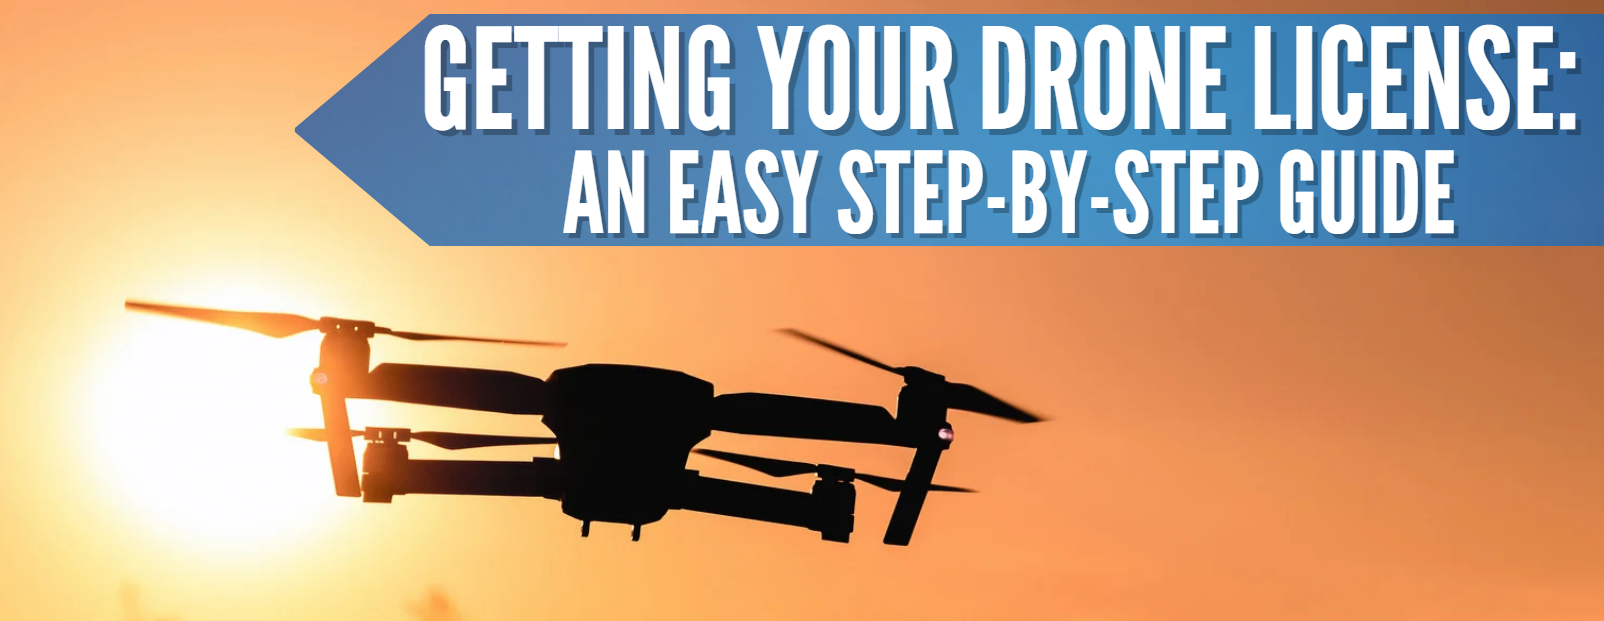 Getting Your Drone License An Easy Step by Step Guide